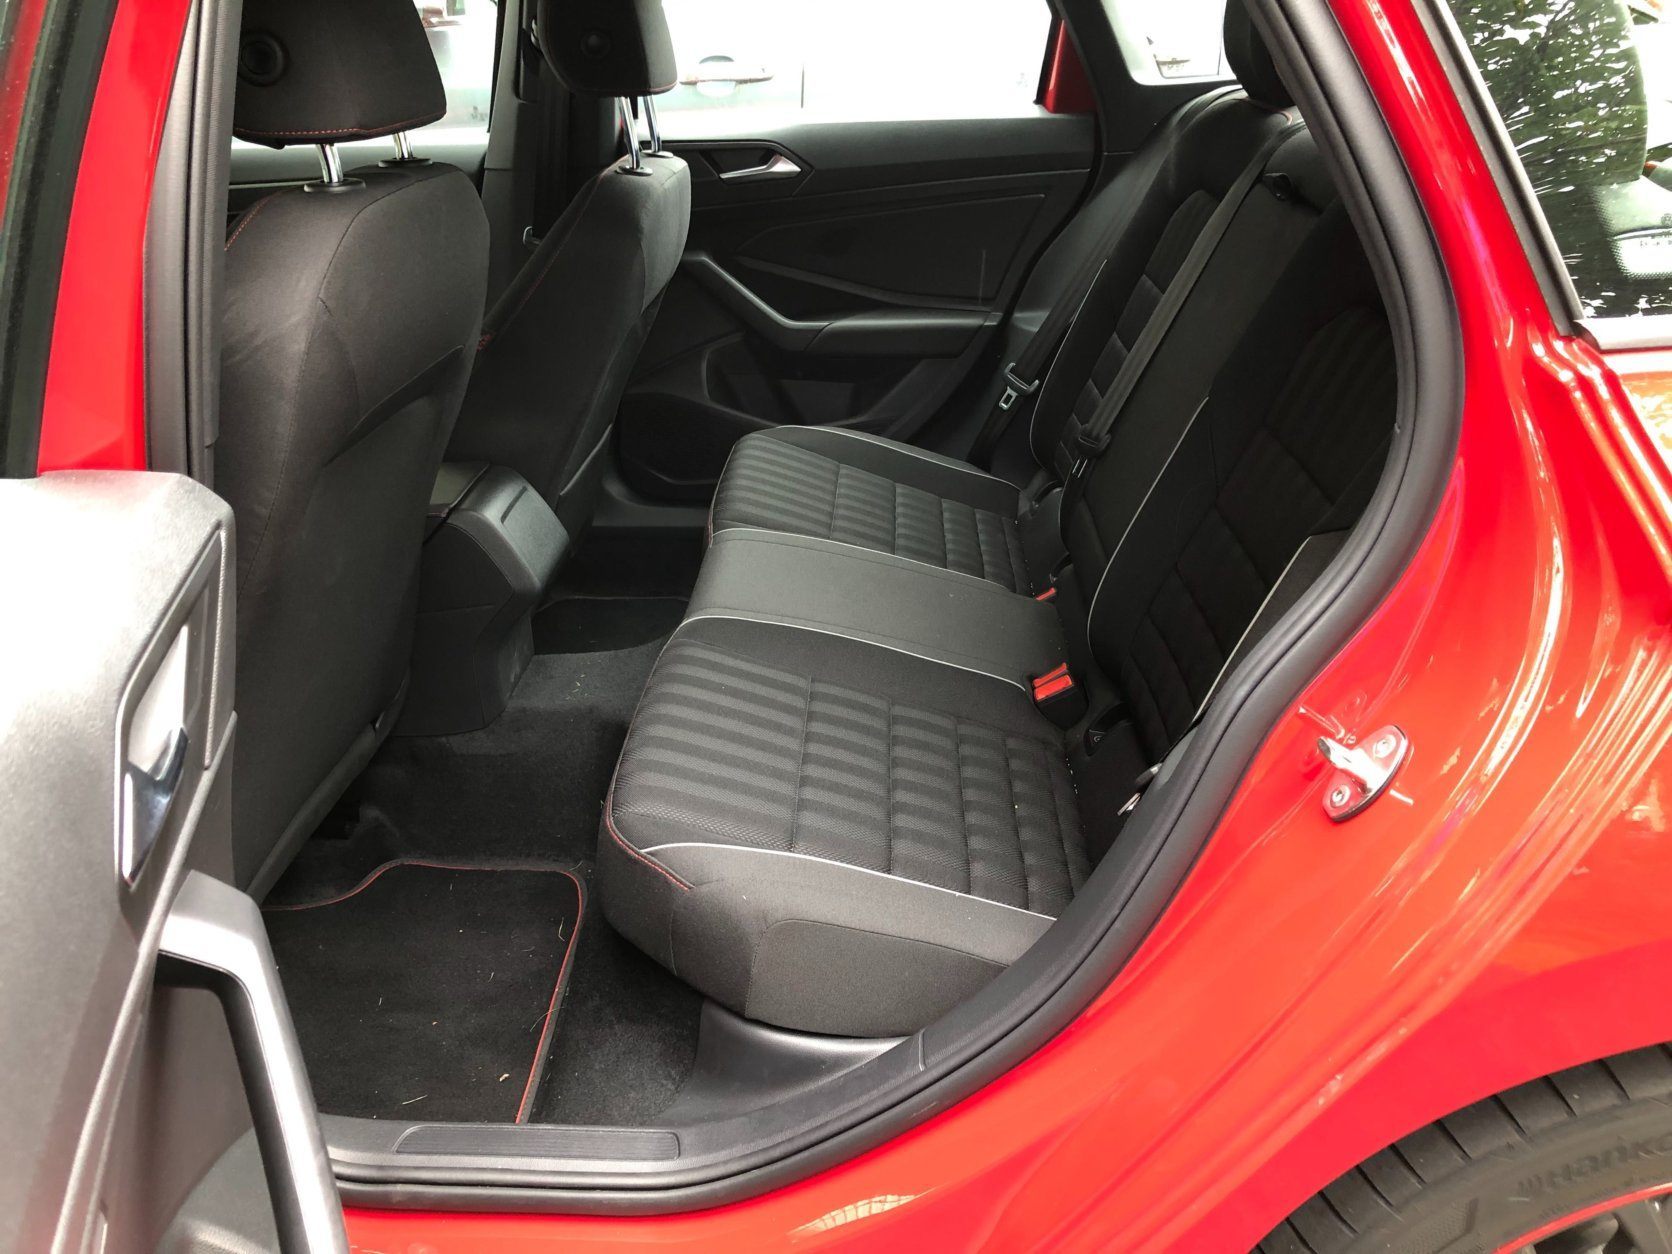 <p>Space is a big asset in the Jetta with plenty of head and leg room front and back.</p>
<p>With a price tag of less than $28,000, you have to live with manual seat controls, a smaller 6.5-inch touchscreen and a six-speaker sound system that sounds average. A higher trim level fixes that but costs about $2,000 more.</p>
